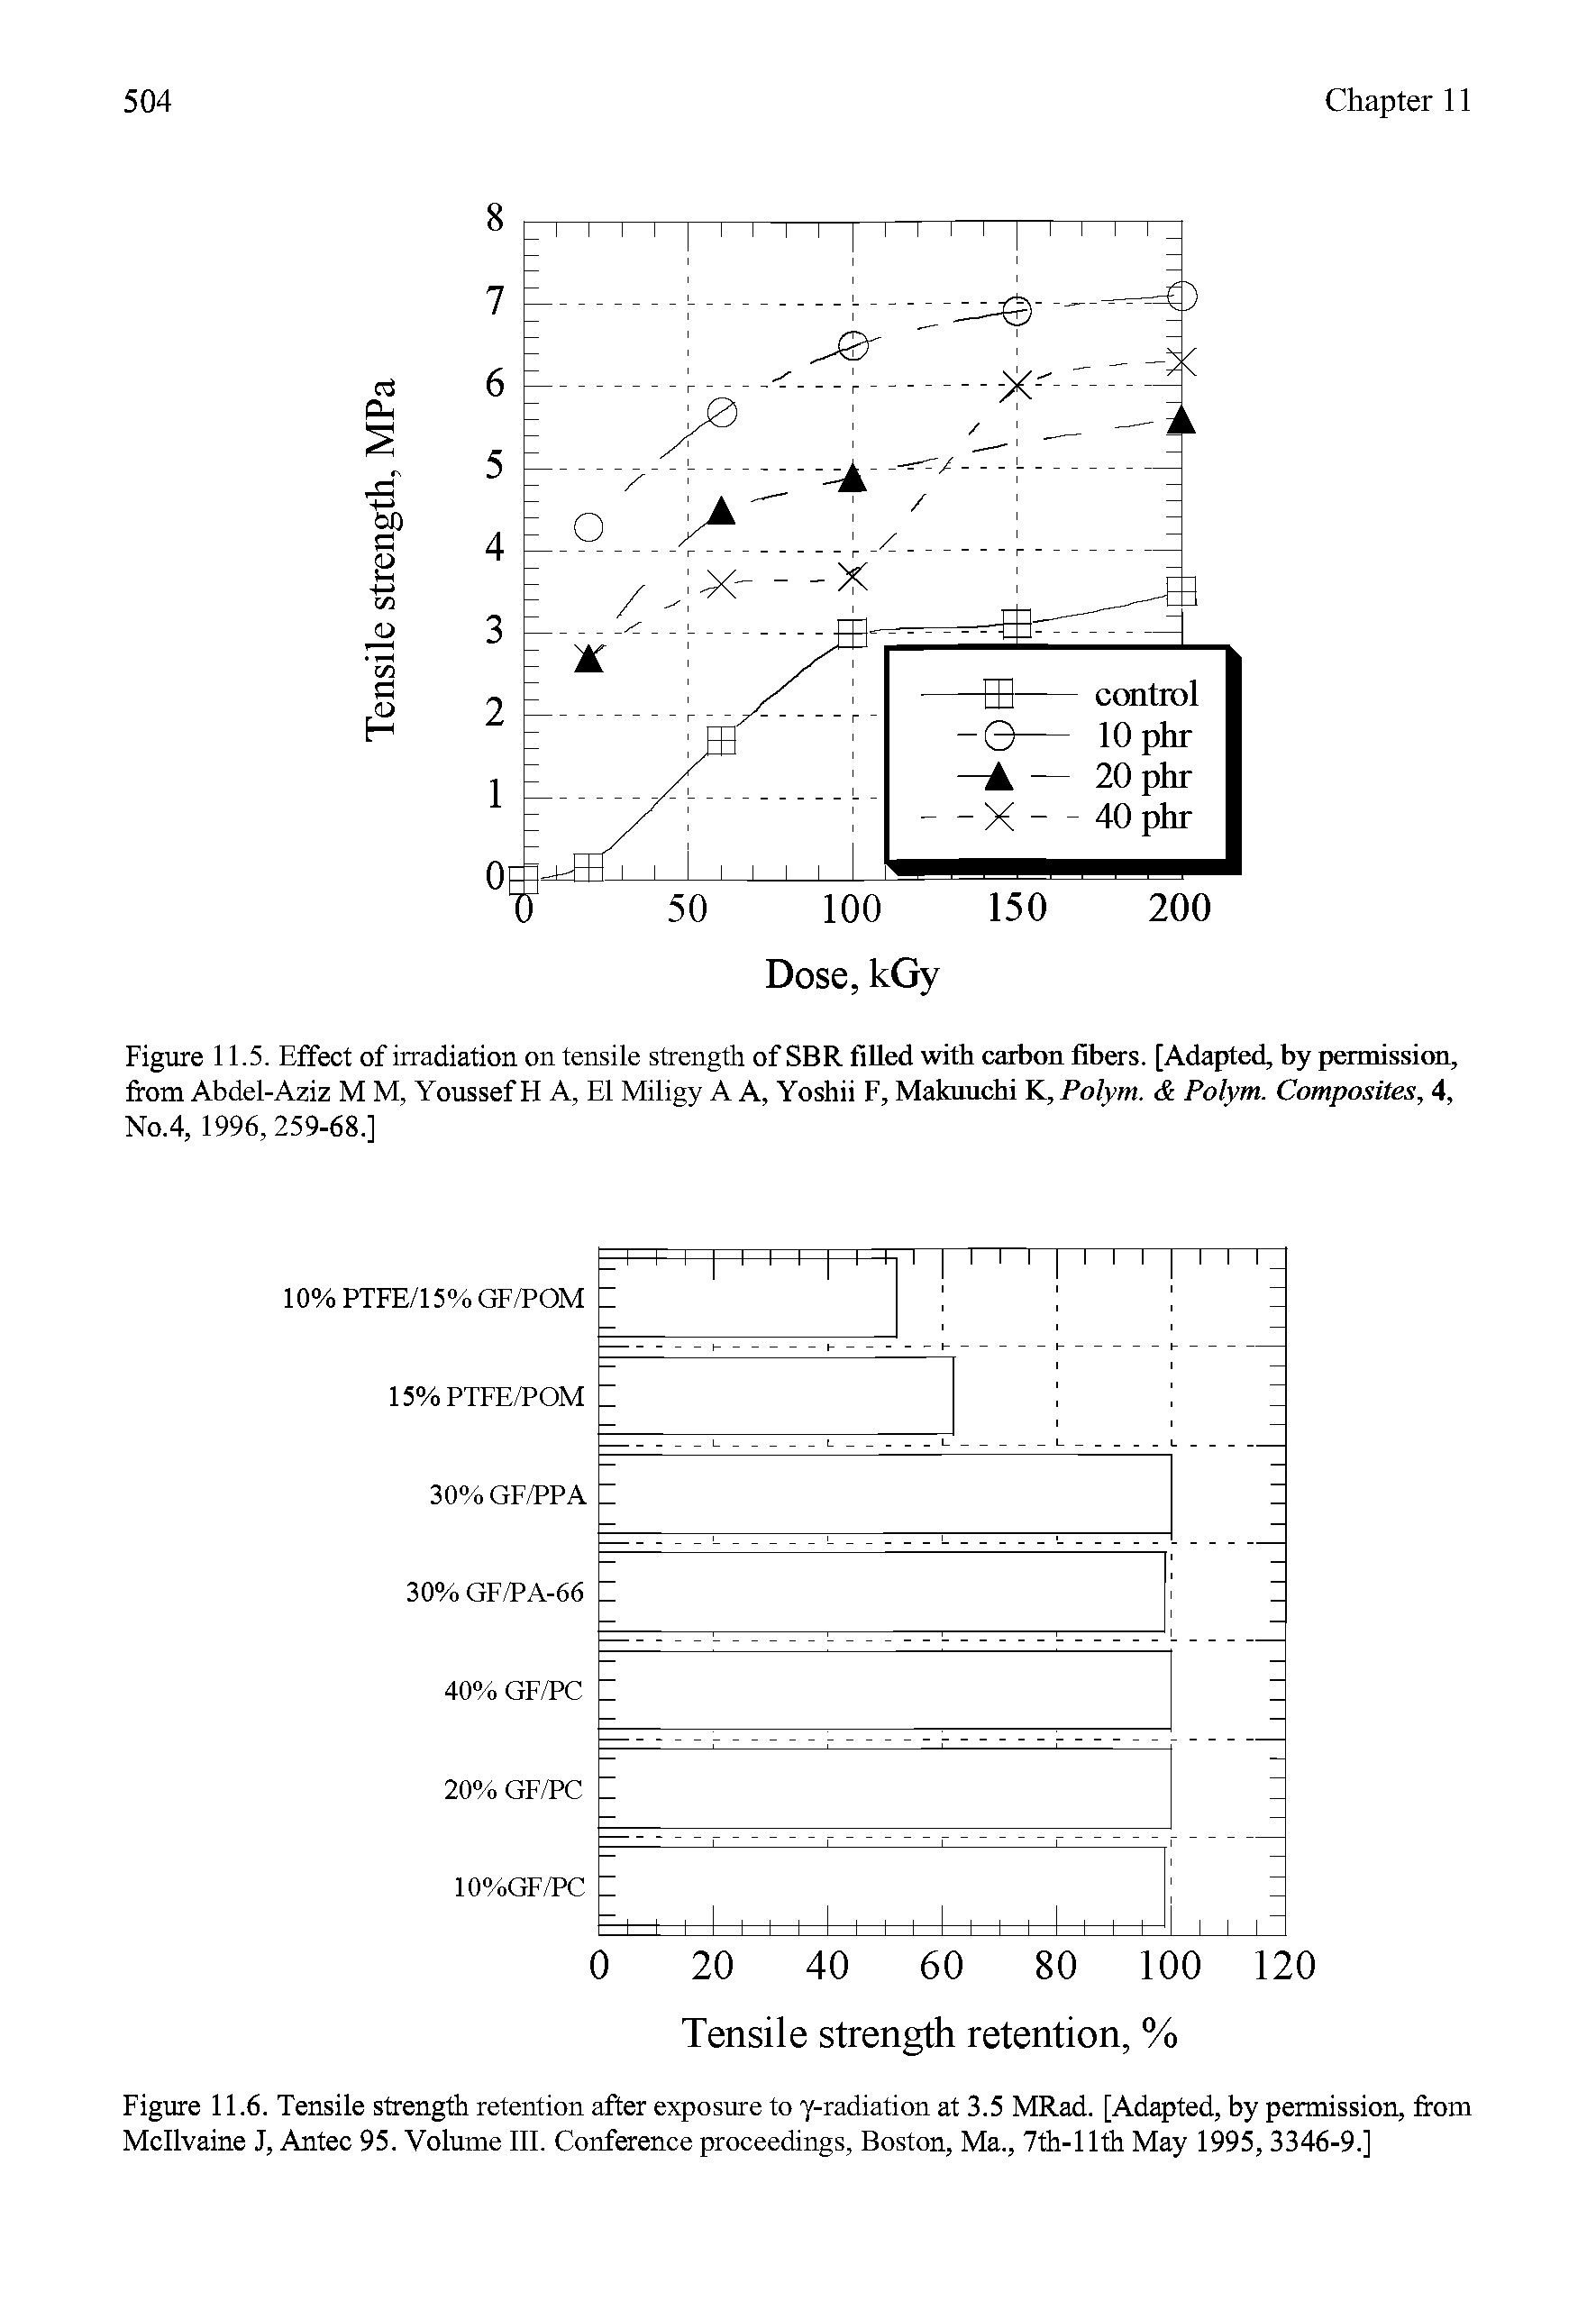 Figure 11.6. Tensile strength retention after exposure to y-radiation at 3.5 MRad. [Adapted, by permission, from Mcllvaine J, Antec 95. Volume III. Conference proceedings, Boston, Ma., 7th-llth May 1995, 3346-9.]...